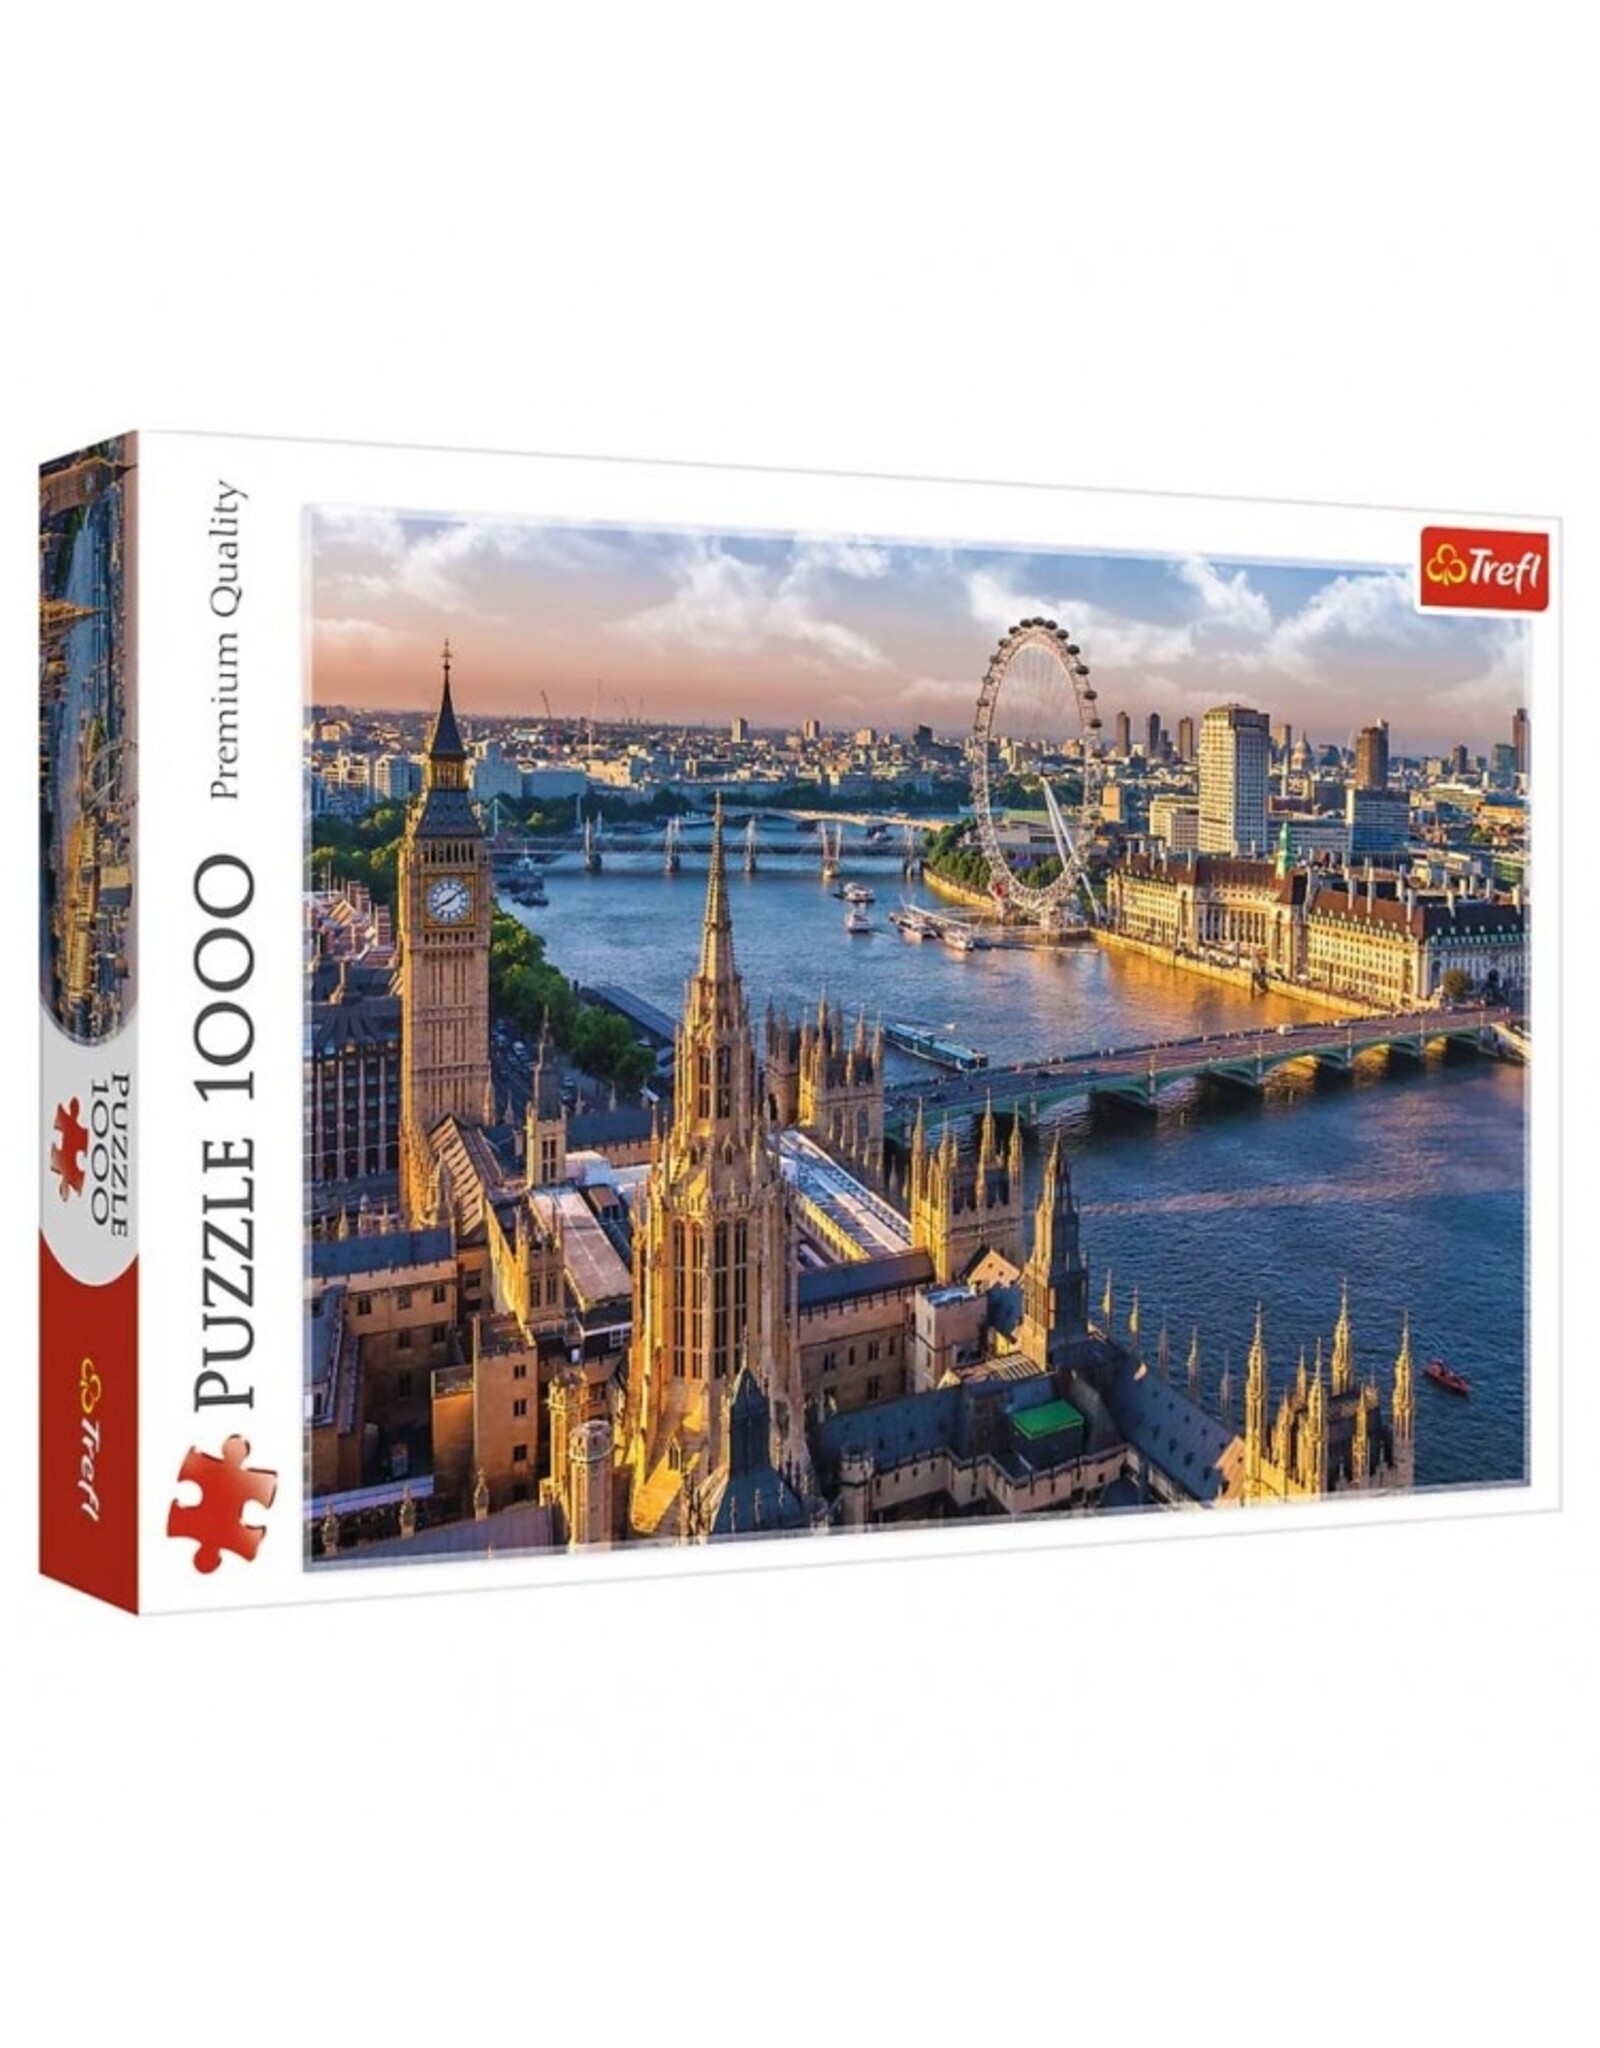 Trefl Puzzle:London/Getty Images 1000pc